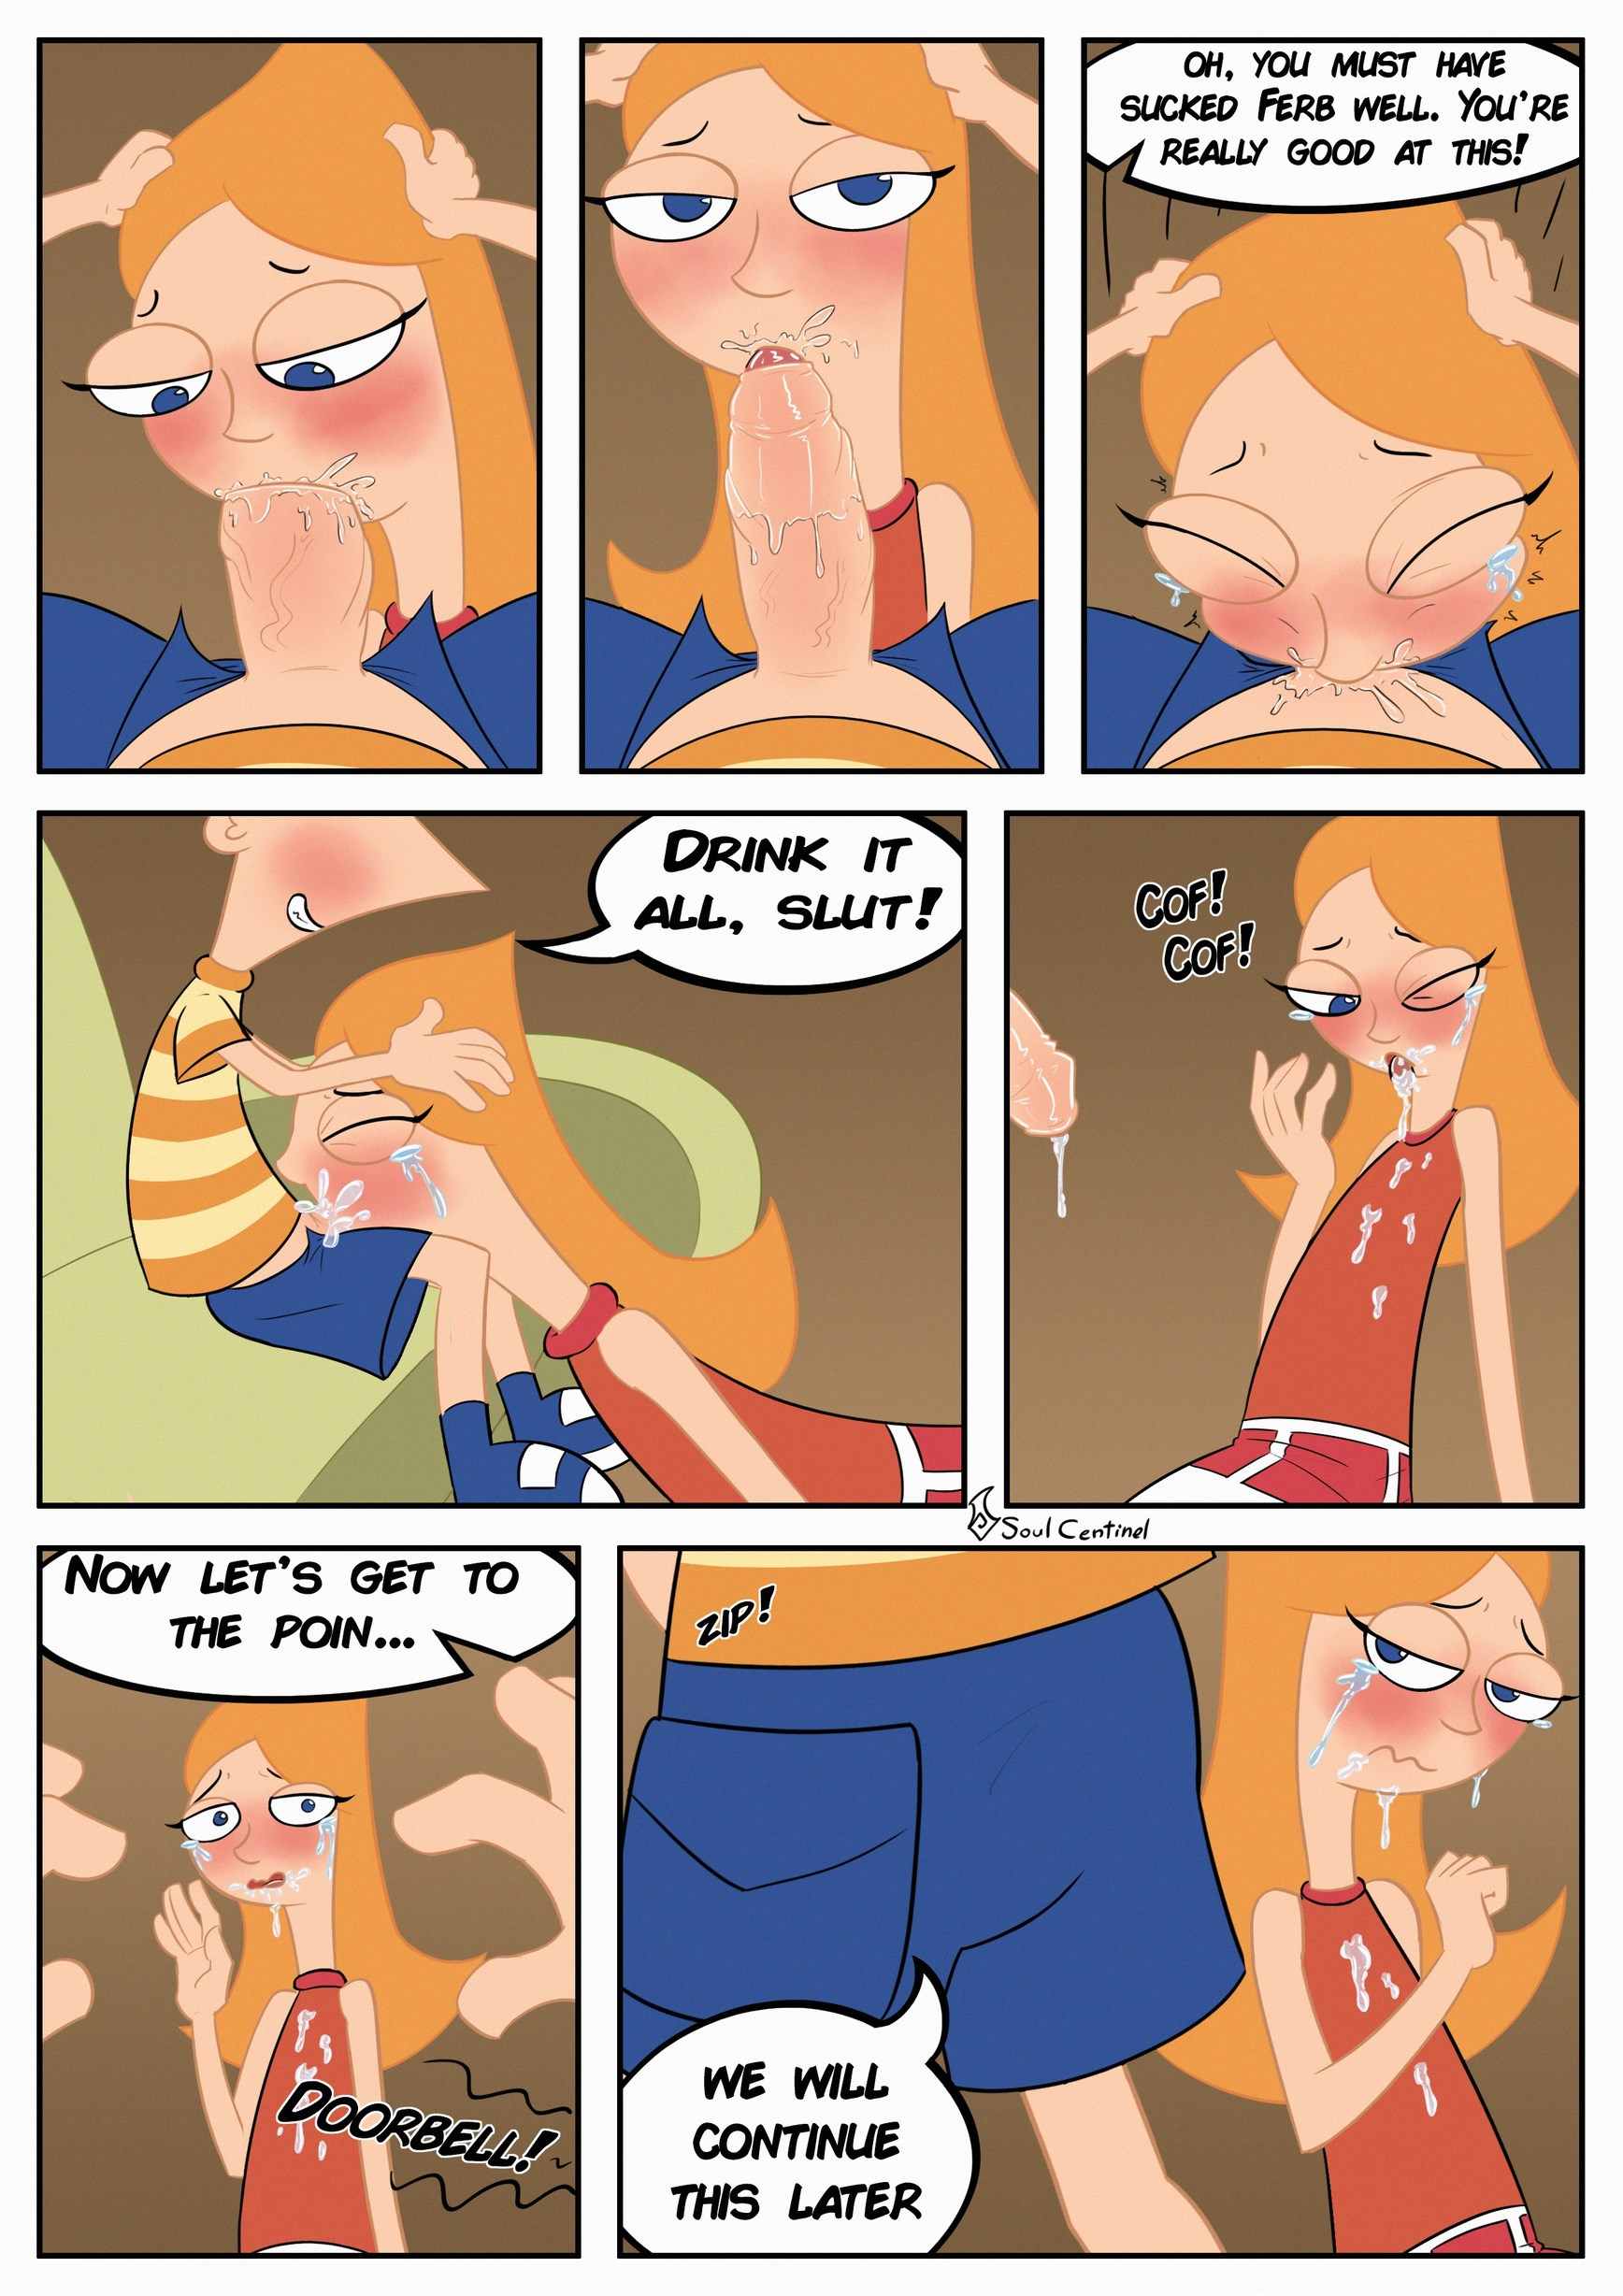 Phineas And Ferb Porn Blowjob - Phineas's Revenge â€“ SoulCentinel - Comics Army